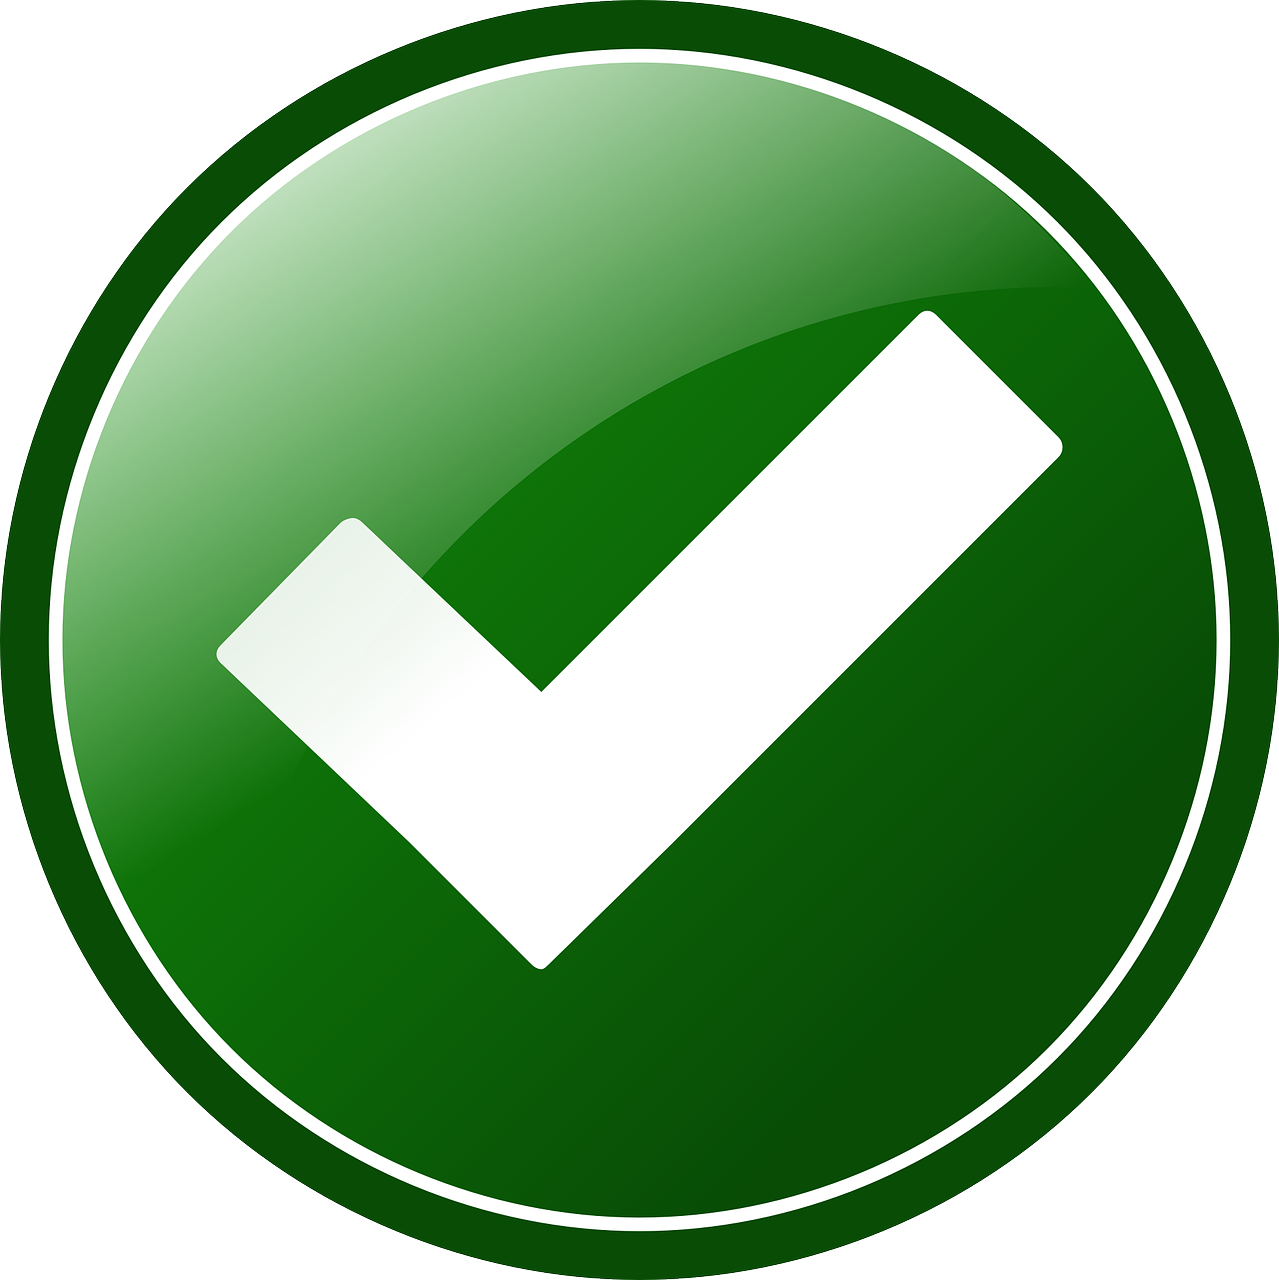 approved, button, check-151676.jpg